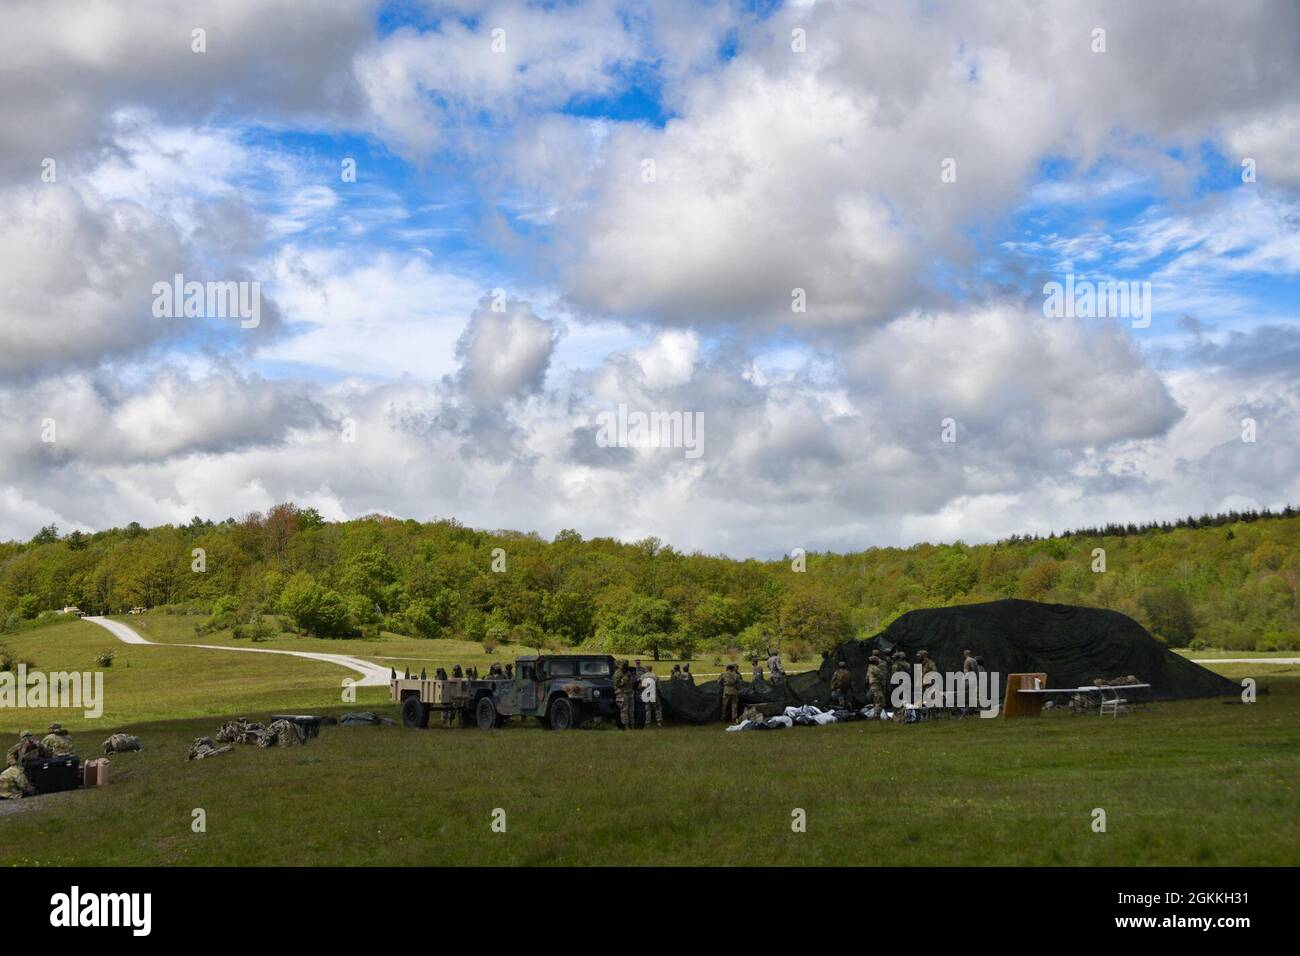 U.S. Soldiers with 601st Aviation Support Battalion, 1st Combat Aviation Brigade, 1st Infantry Division conduct field readiness exercise at Oberdachstetten Training Area, Ansbach, Germany, May 17, 2021. Stock Photo